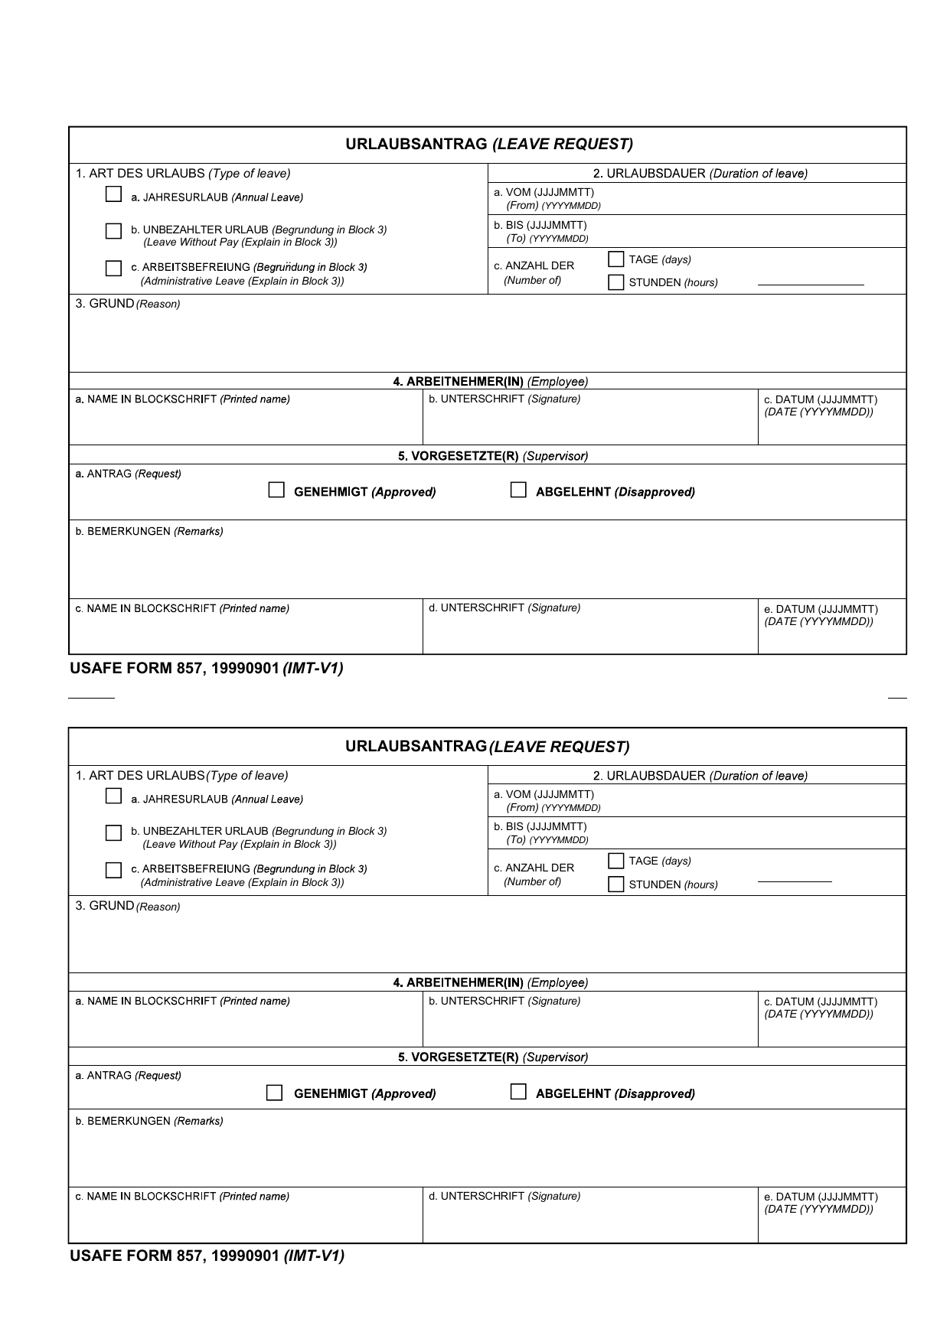 USAFE Form 857 Leave Request (English / German), Page 1